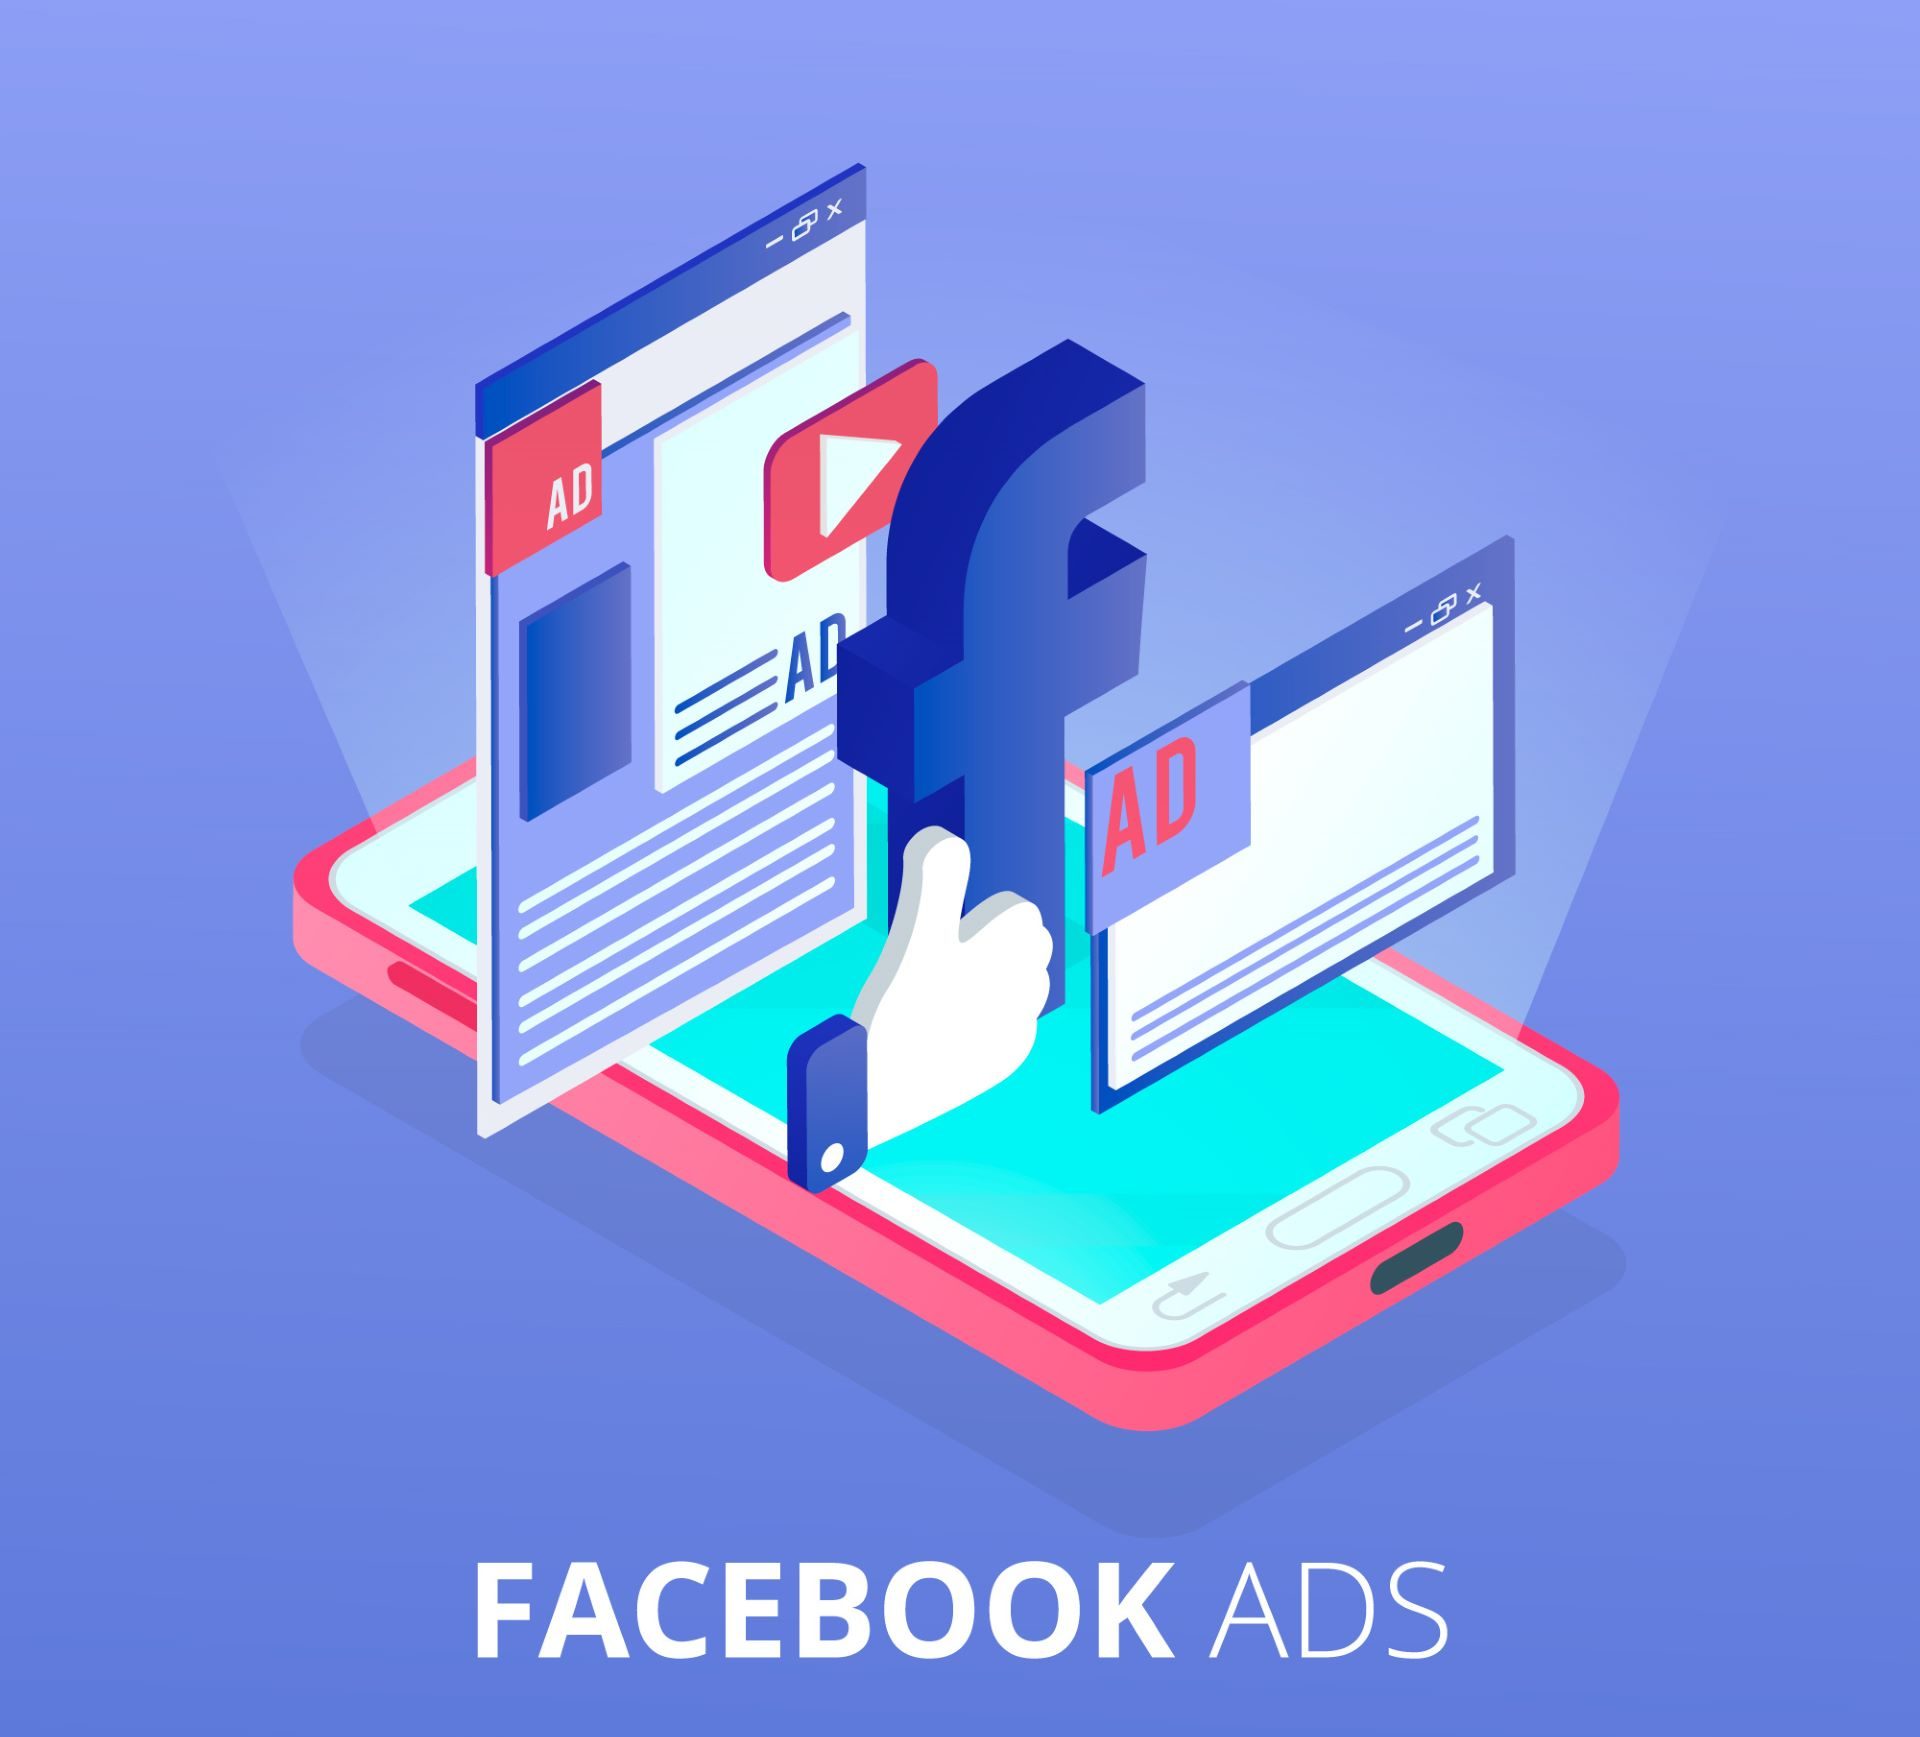 Facebook Introduces Ad Targeting Based on Users’ Travel-Related Web History